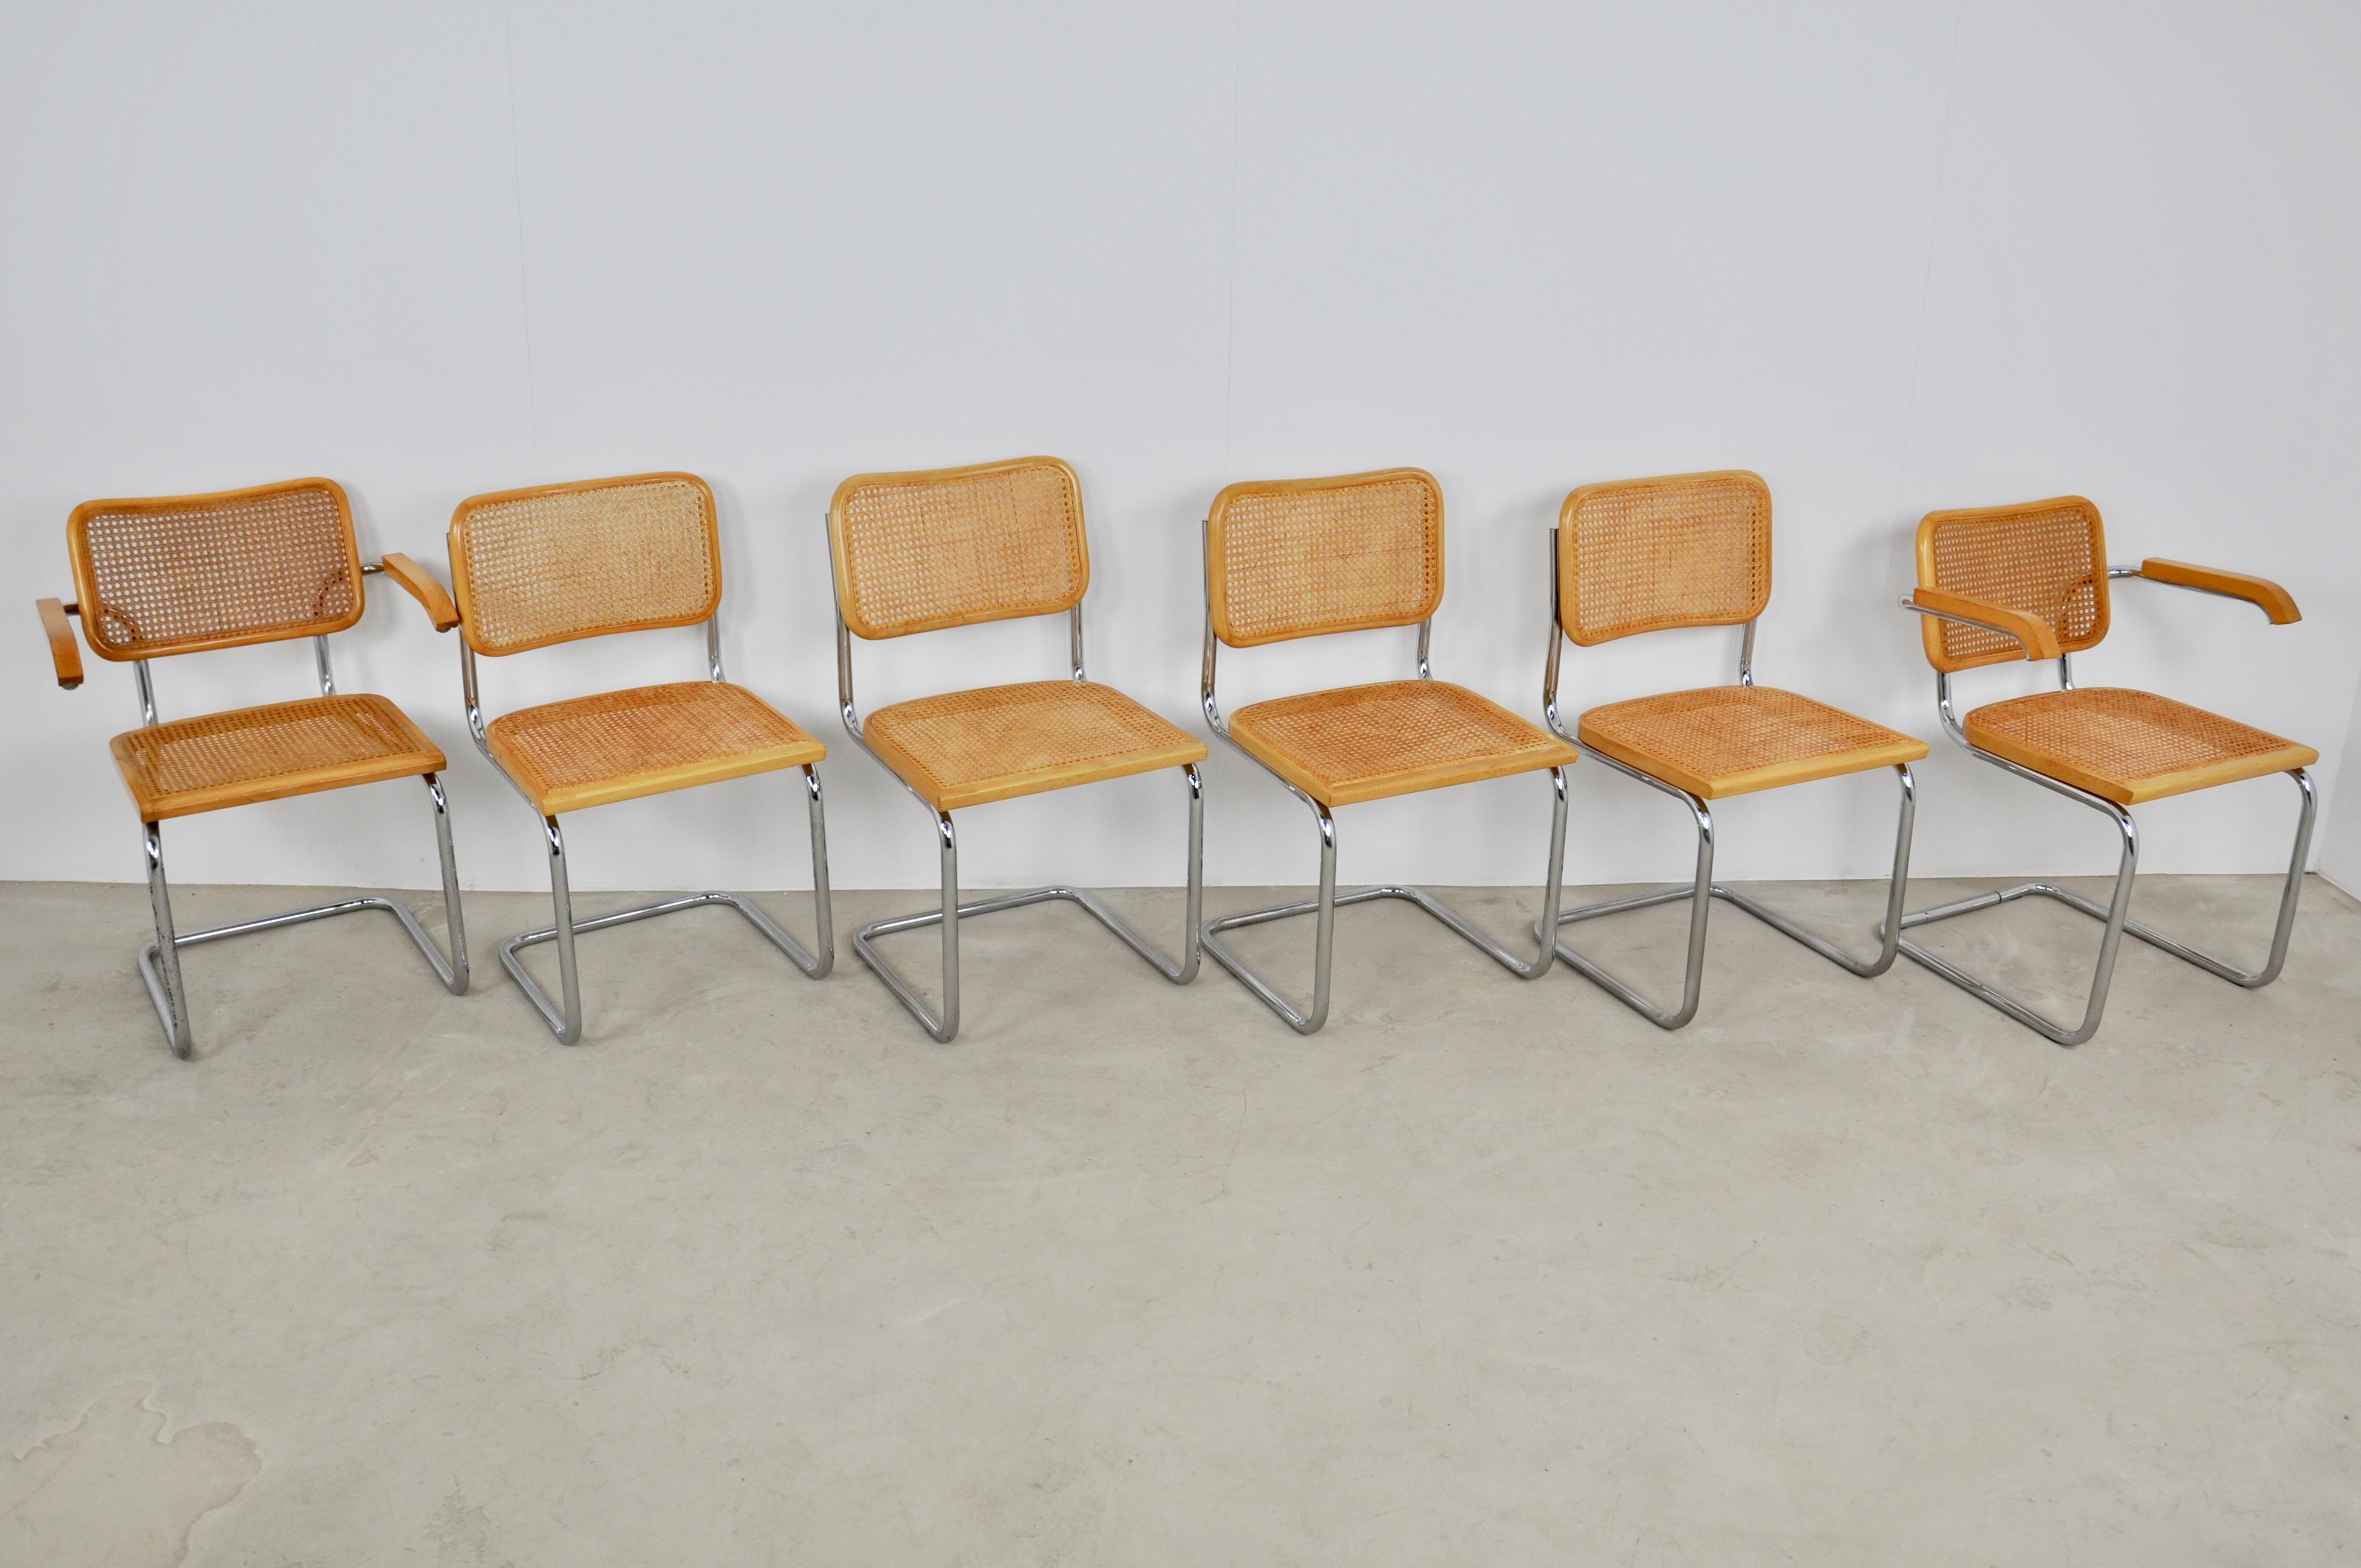 Set of 6 chairs in metal and wood wickerwork. Slight wear due to the time and the age of the chairs.
Dimensions: Chair H 82cm, W 47cm, D 51 cm, armchair H 82 cm, L 61 cm, D 57 cm, seat height 45 cm.